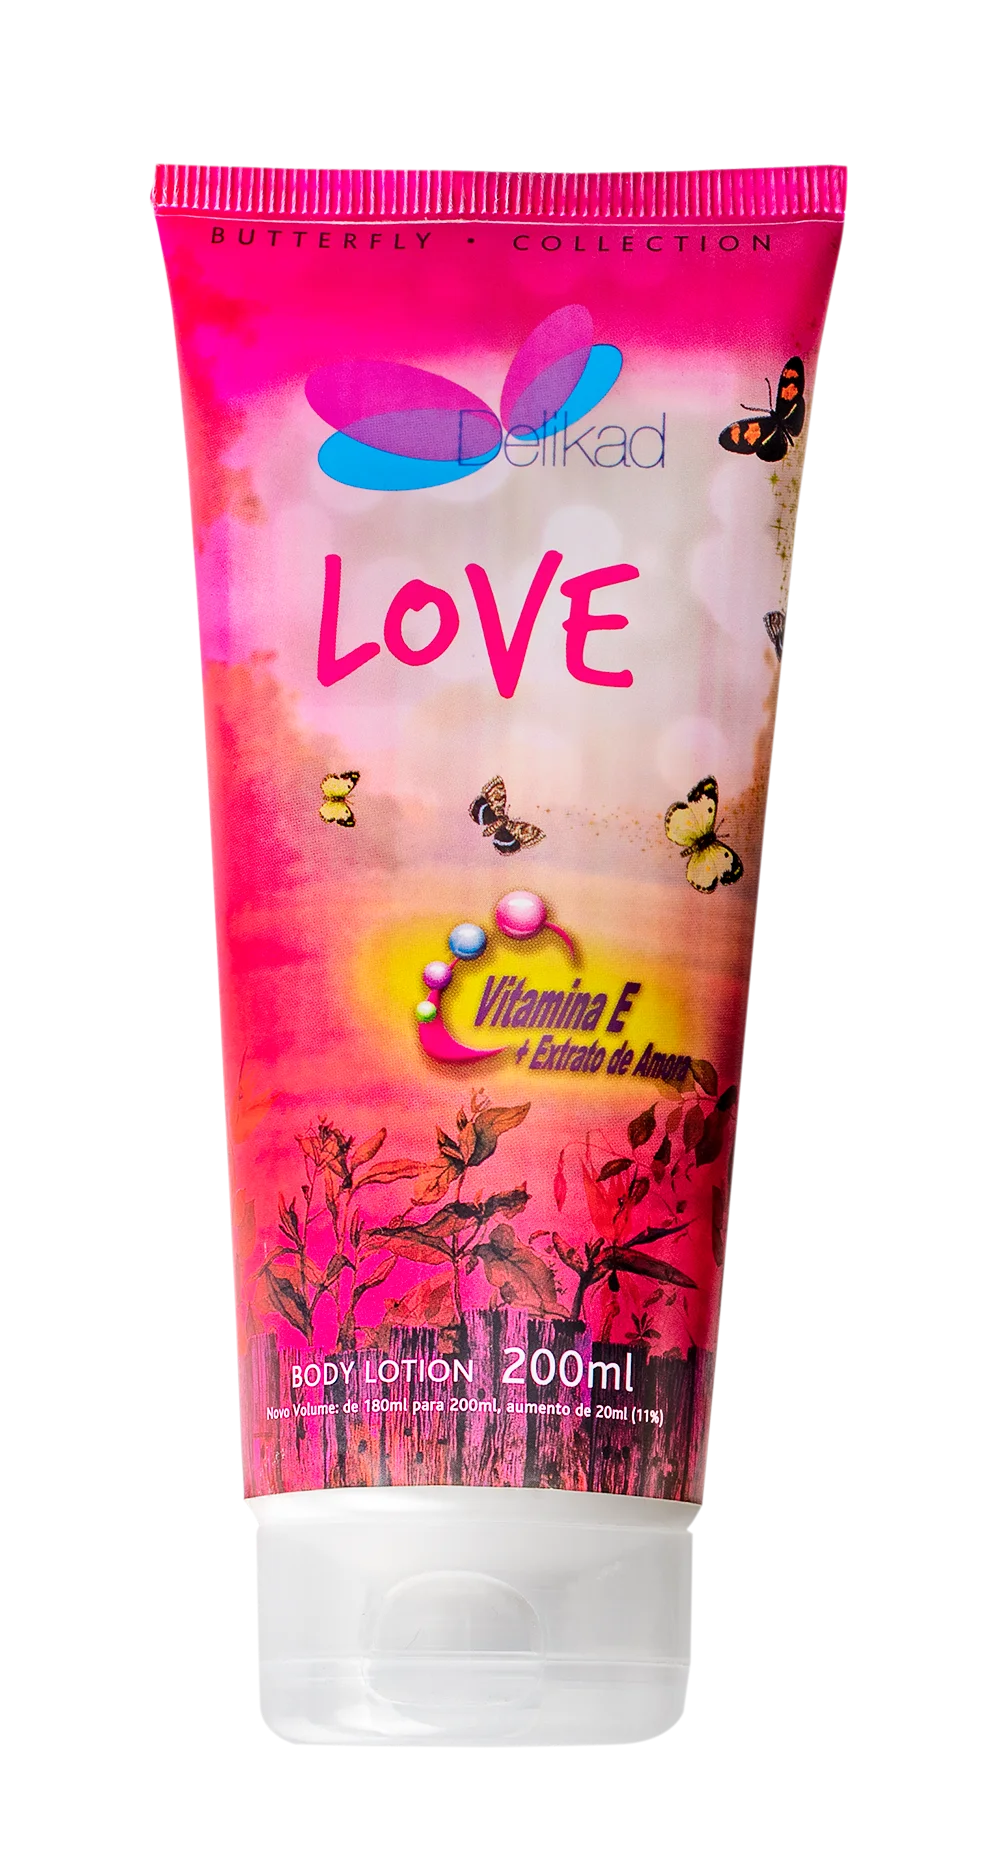 Delikad Butterfly Collection Body Lotion Love